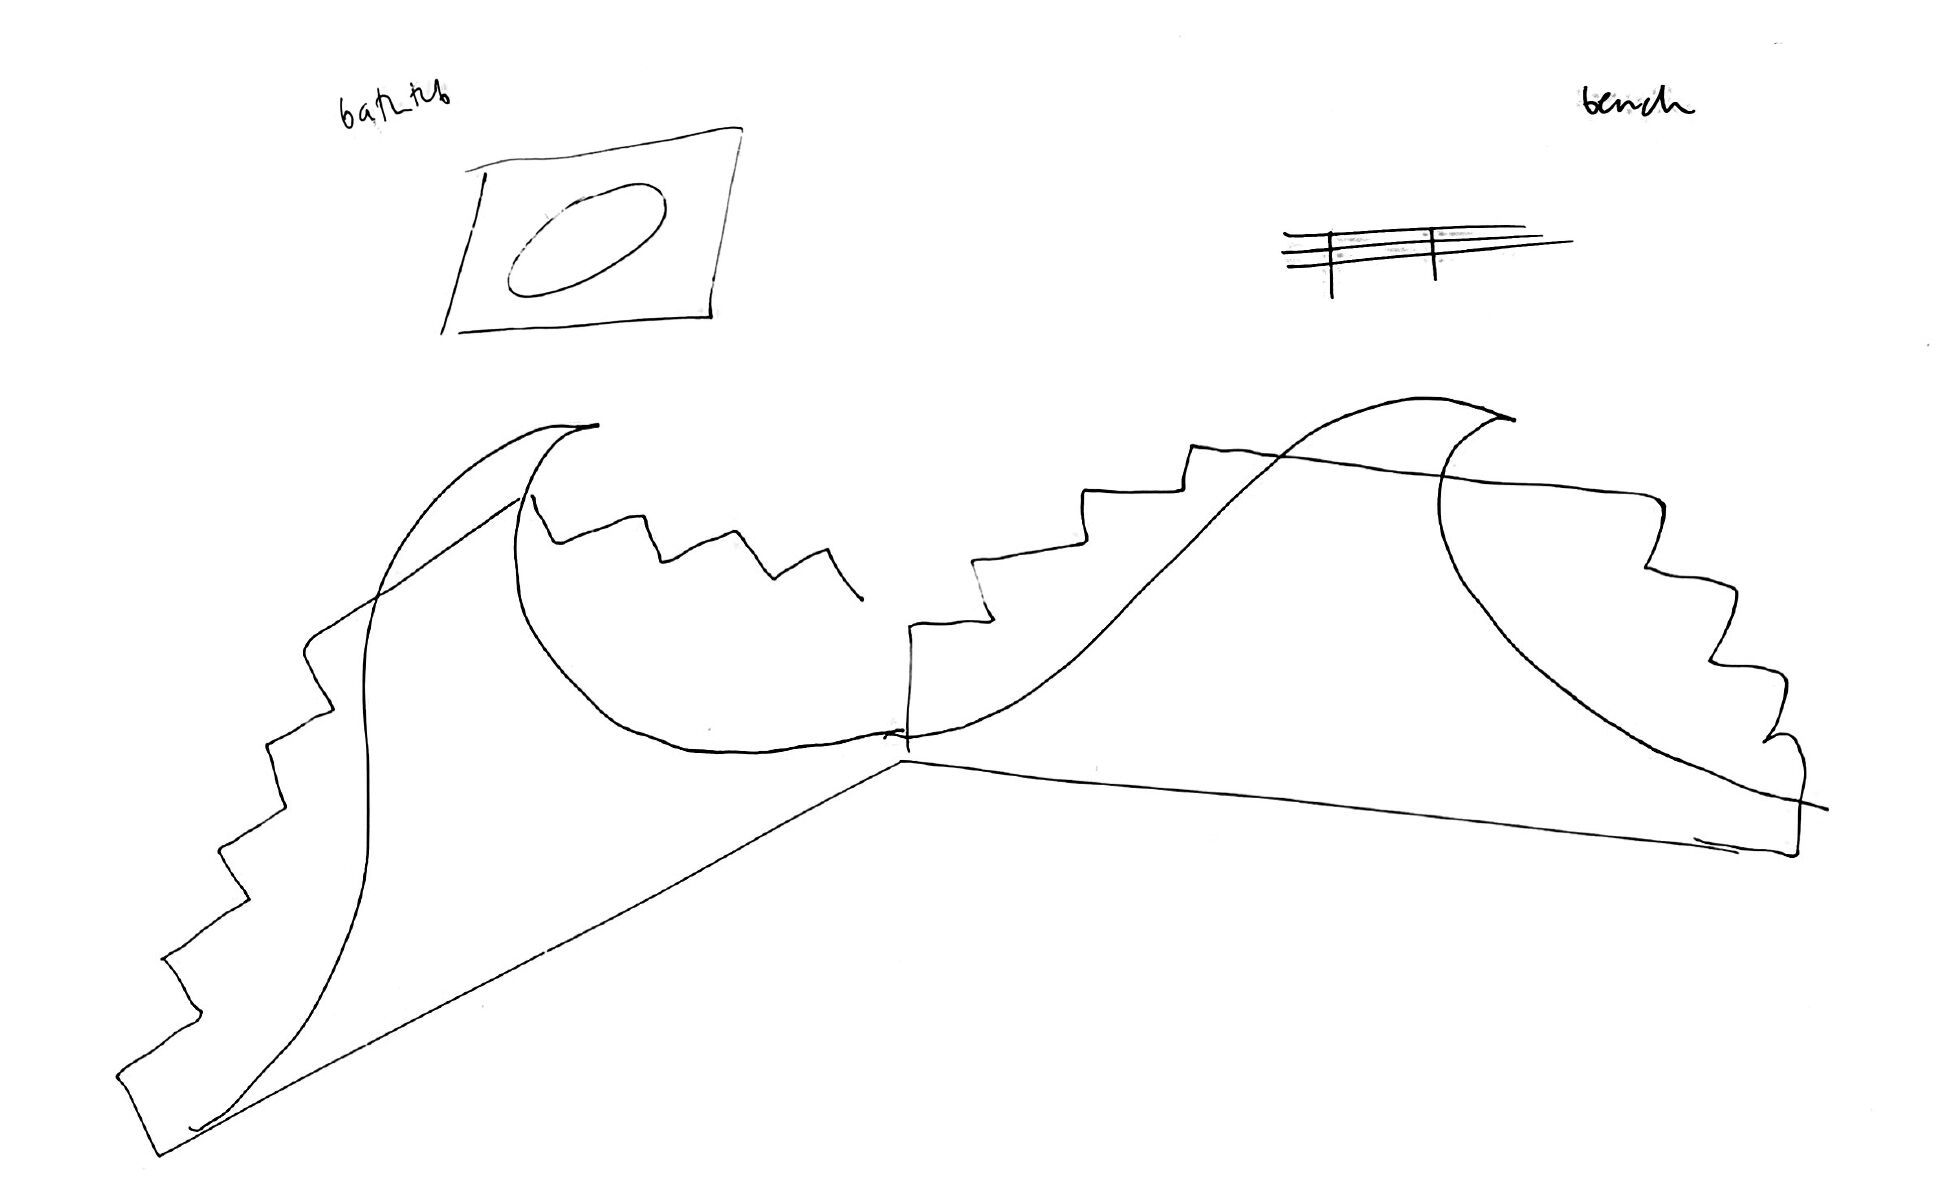 There is a drawing in black pen of two wave shapes, hinged diagonally and each set against step-like pyramidal forms. Above the left wave, there is a drawn oval inside a rectangle, labeled "bathtub." Above the right, there is a simply rendered bench, labeled "bench."